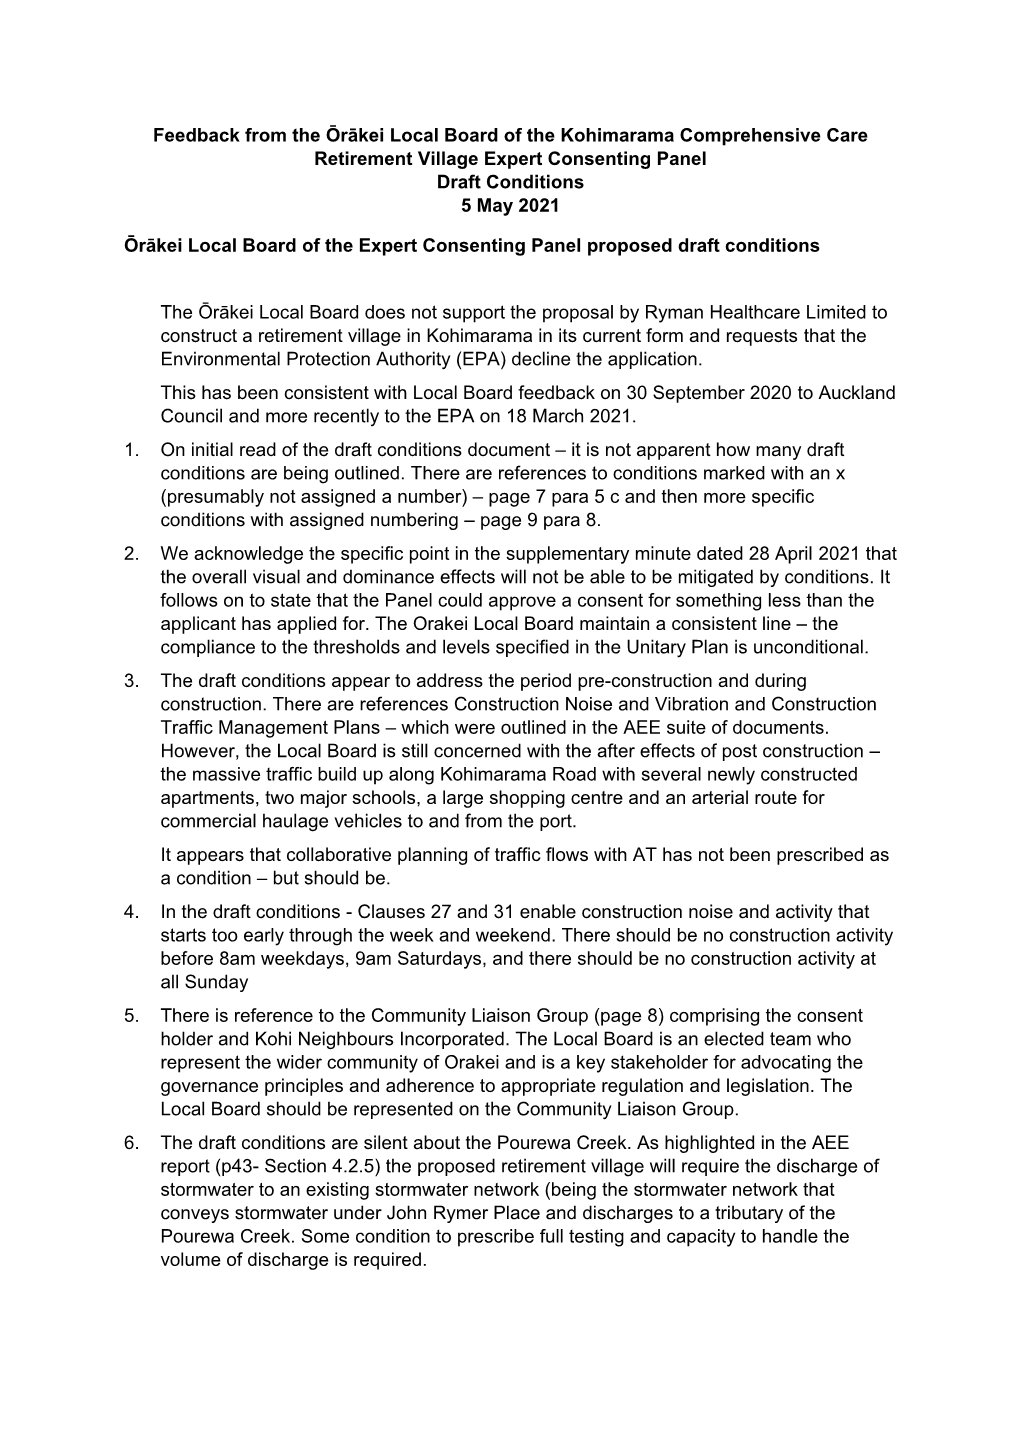 Feedback from the Ōrākei Local Board of the Kohimarama Comprehensive Care Retirement Village Expert Consenting Panel Draft Conditions 5 May 2021